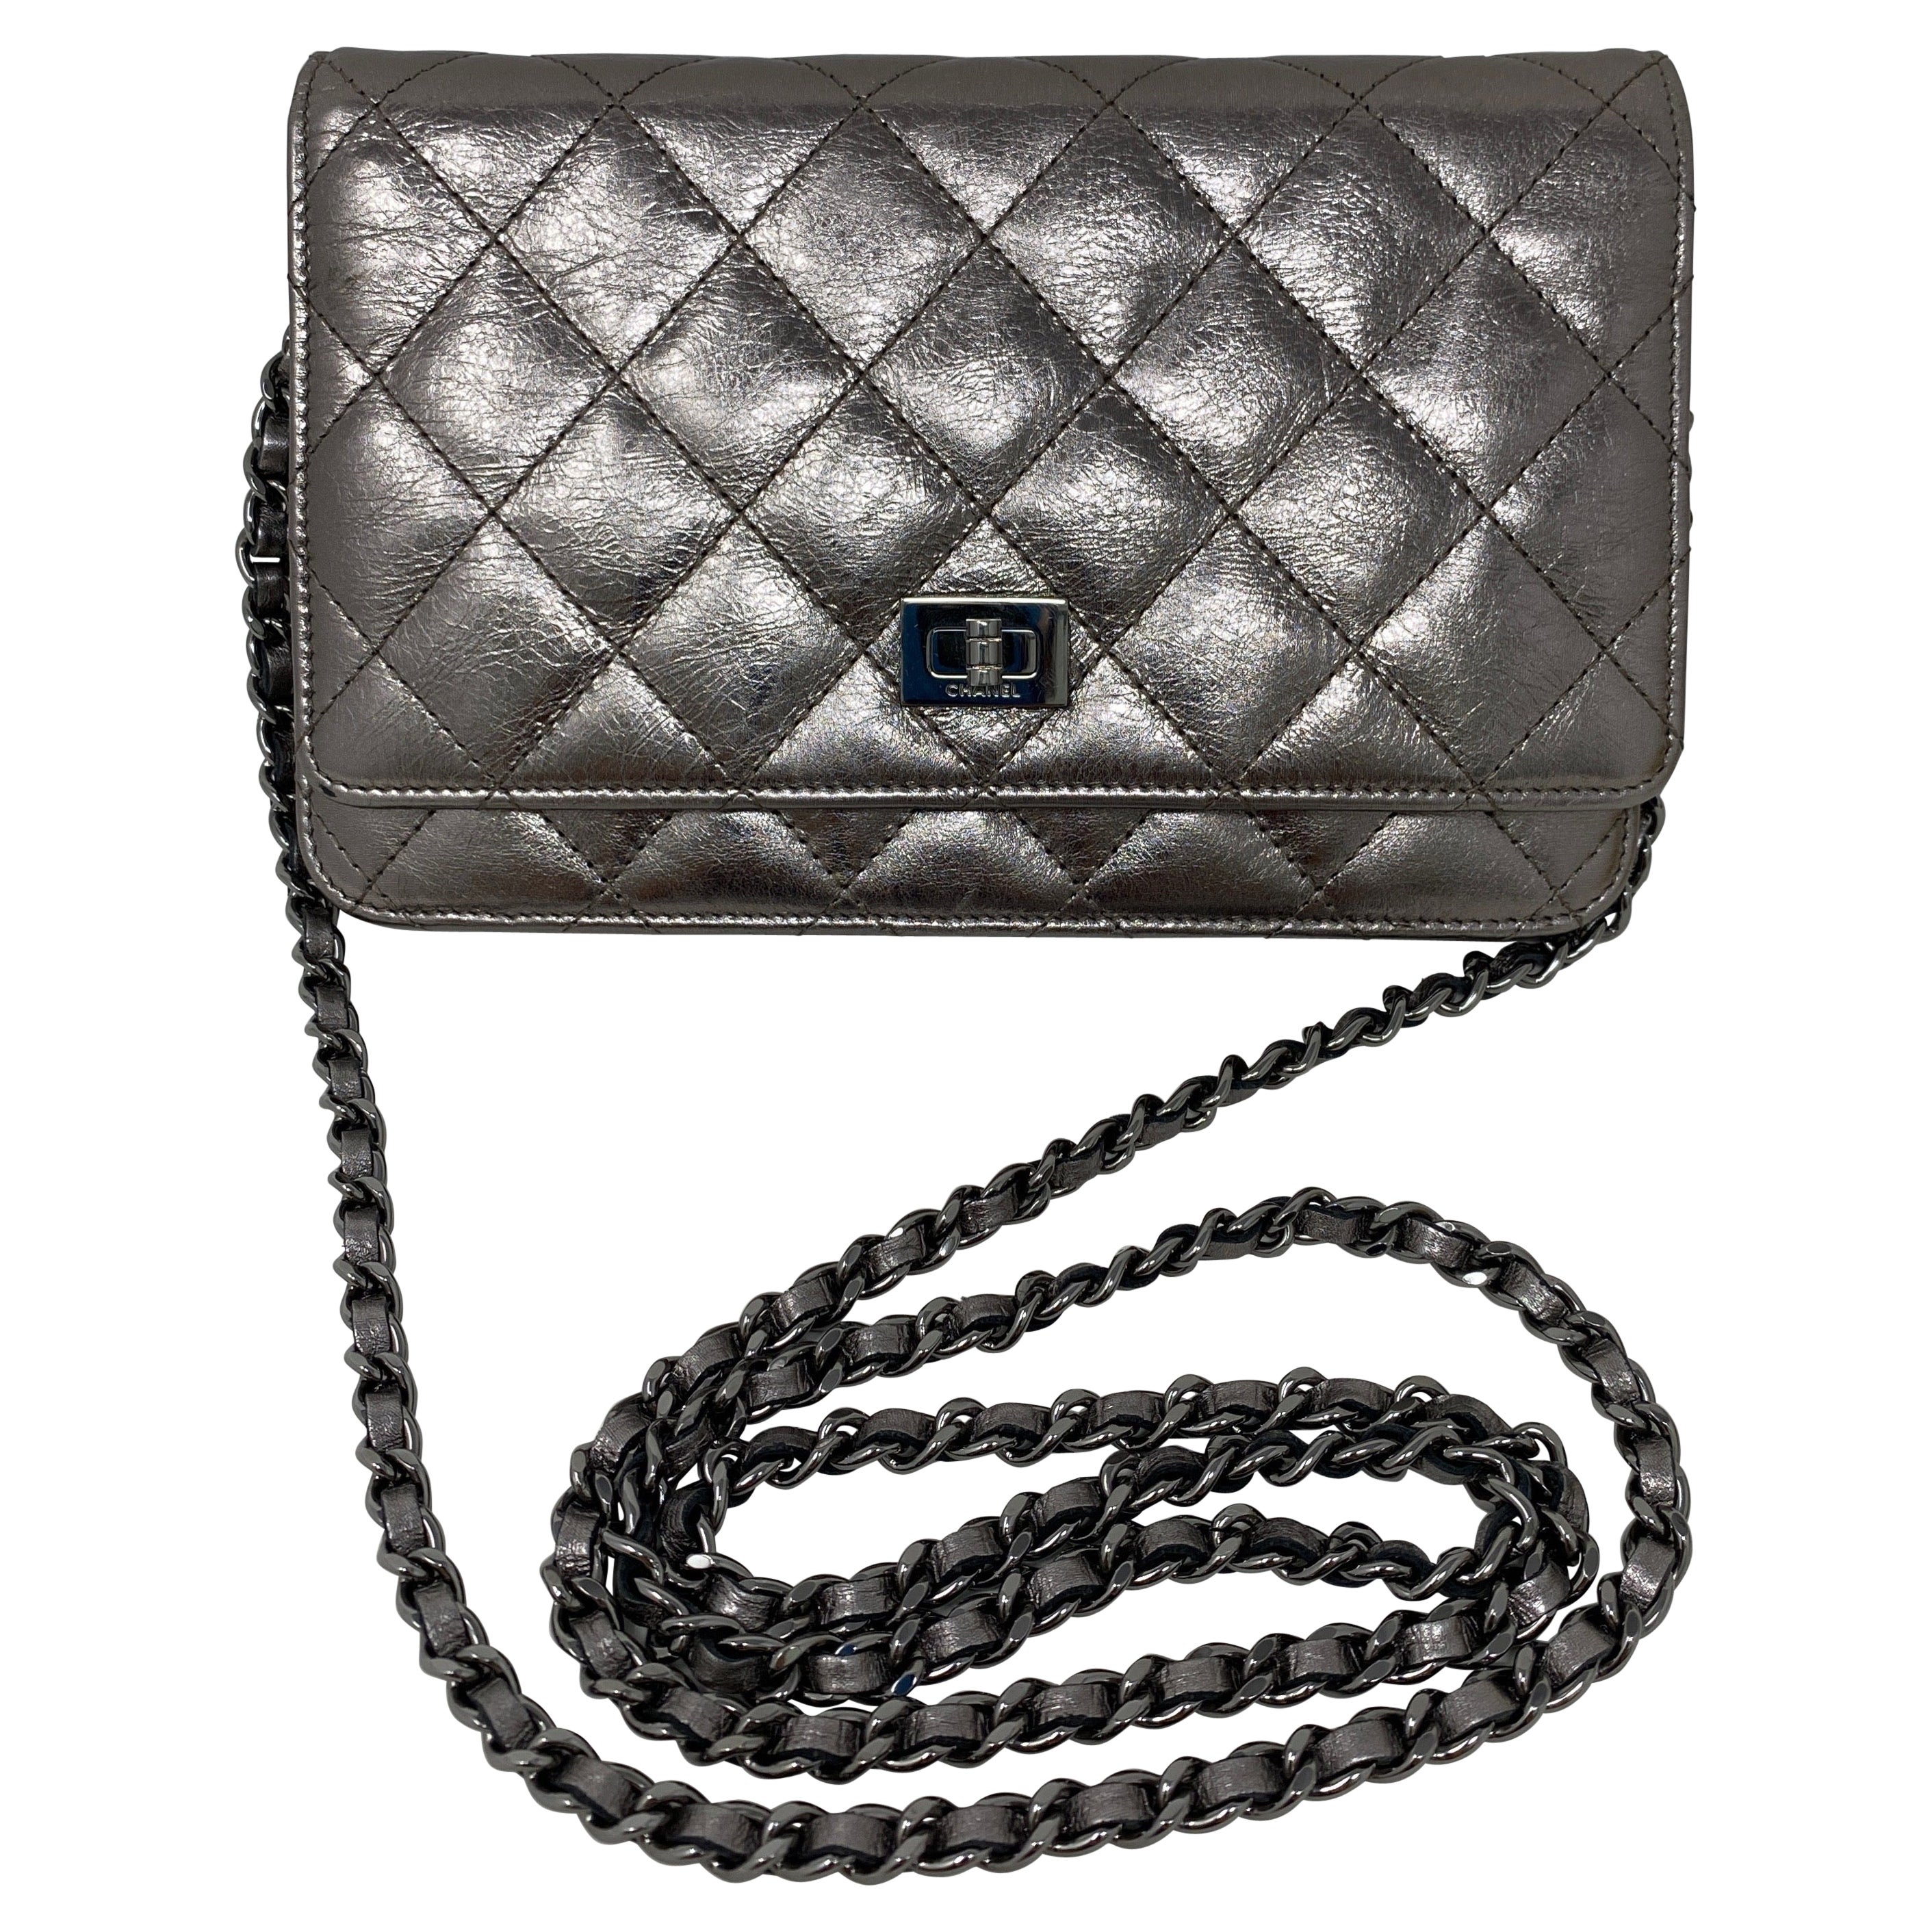 Chanel Silver Metallic Reissue Wallet On A Chain Bag